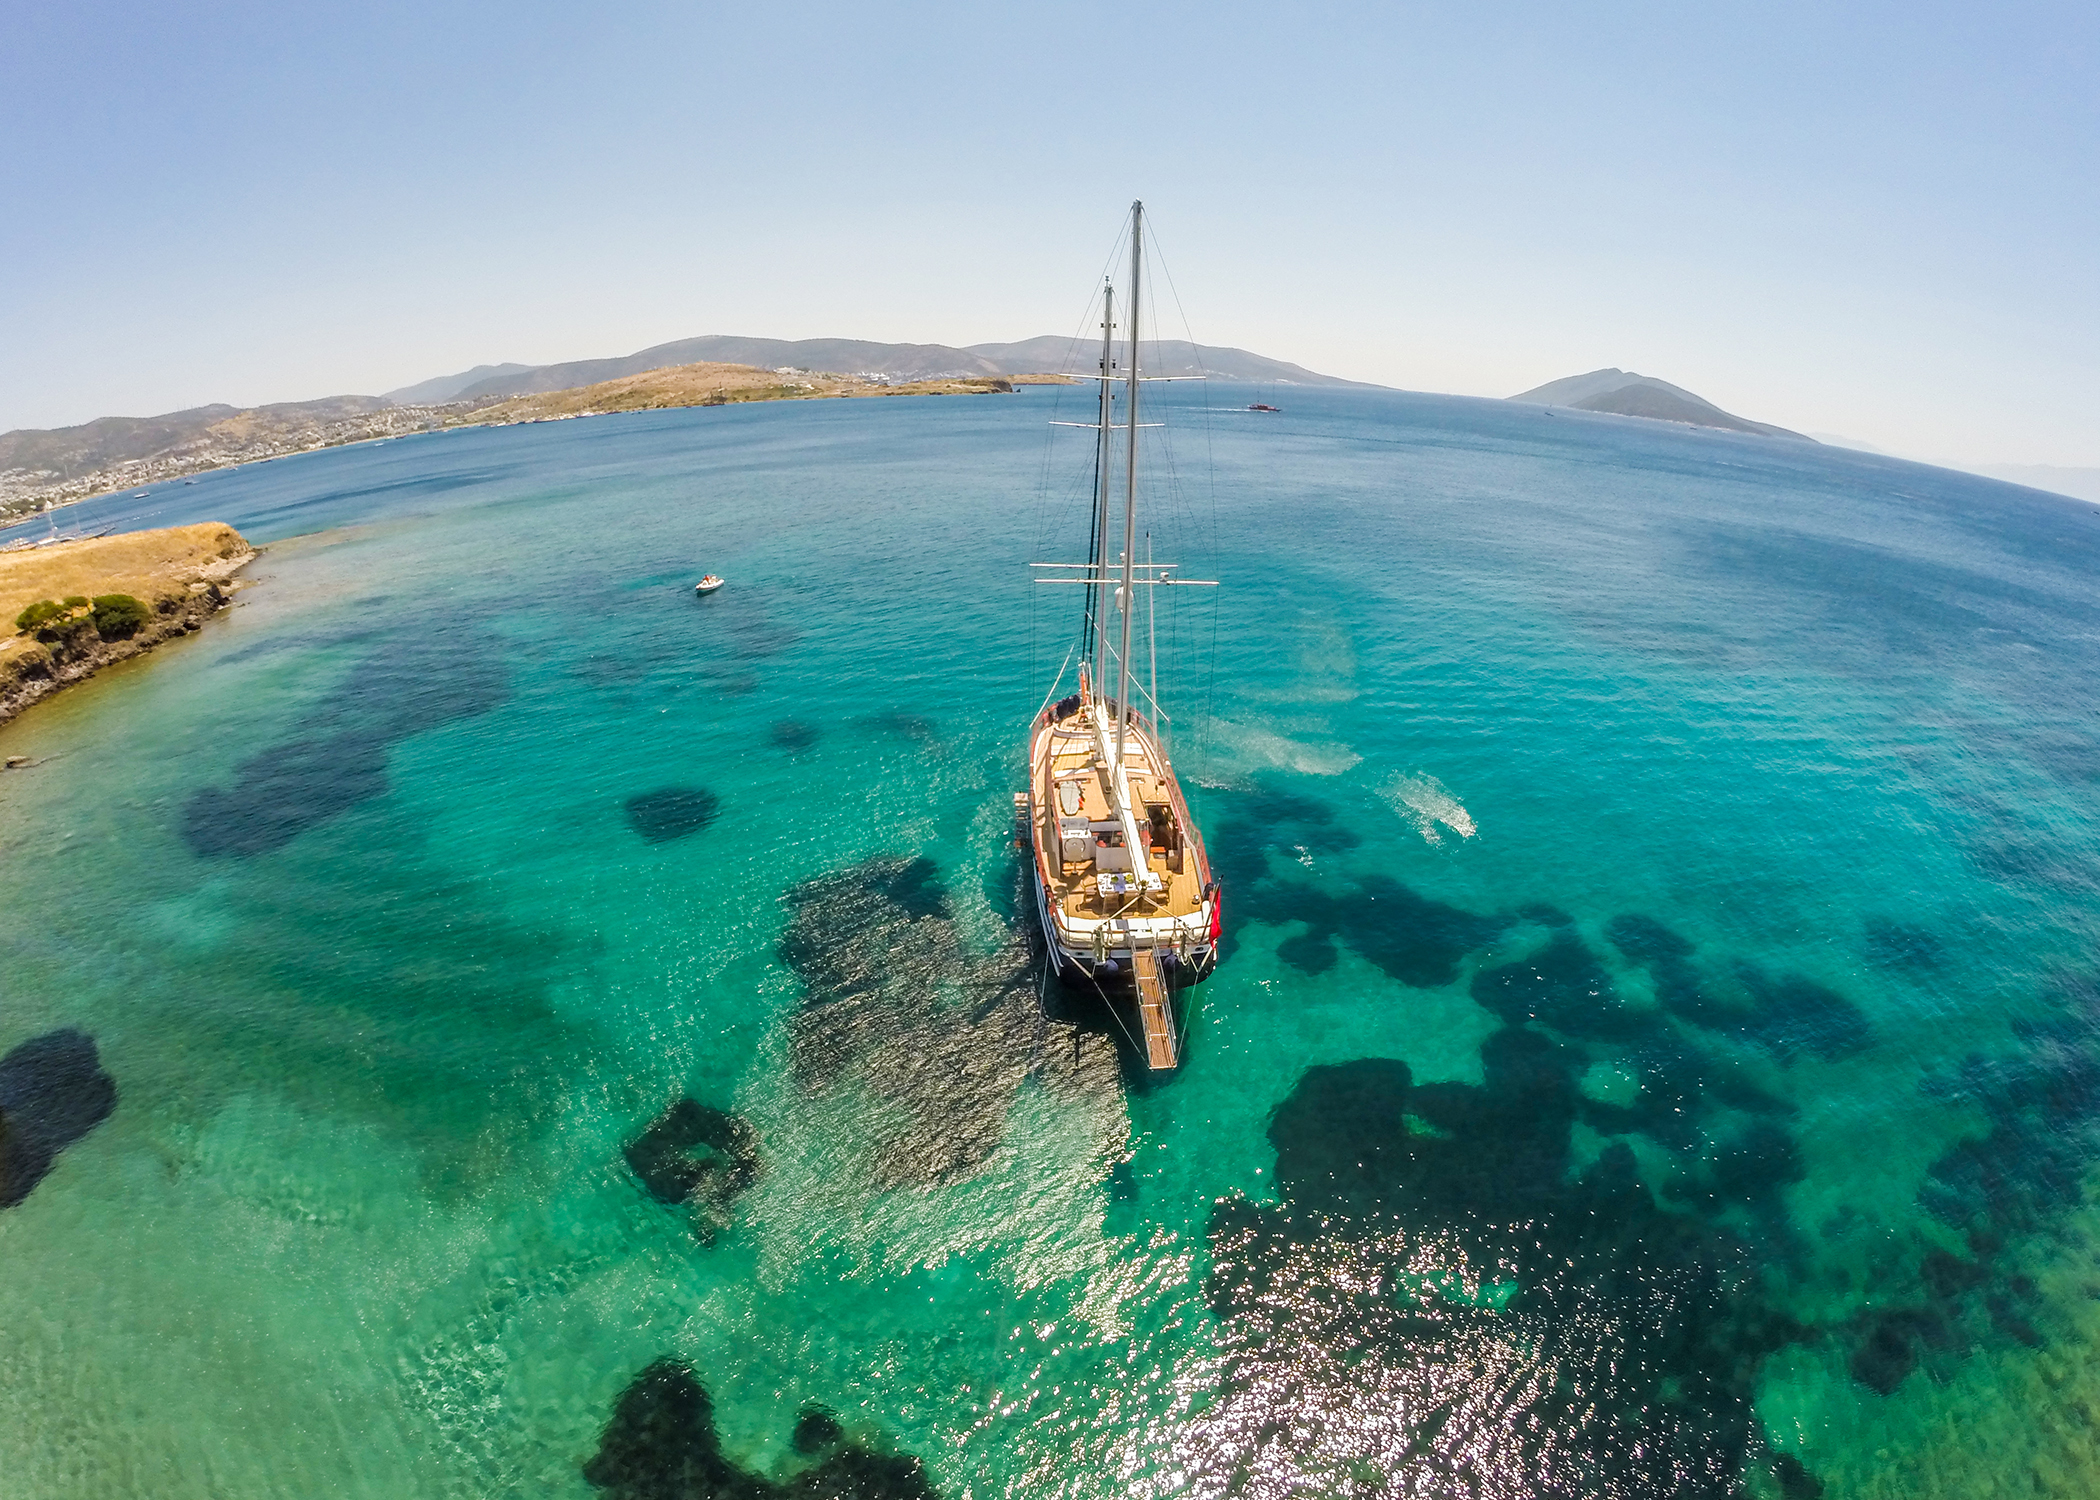 Aerial view of the Artemis gulet in clear Turkish waters